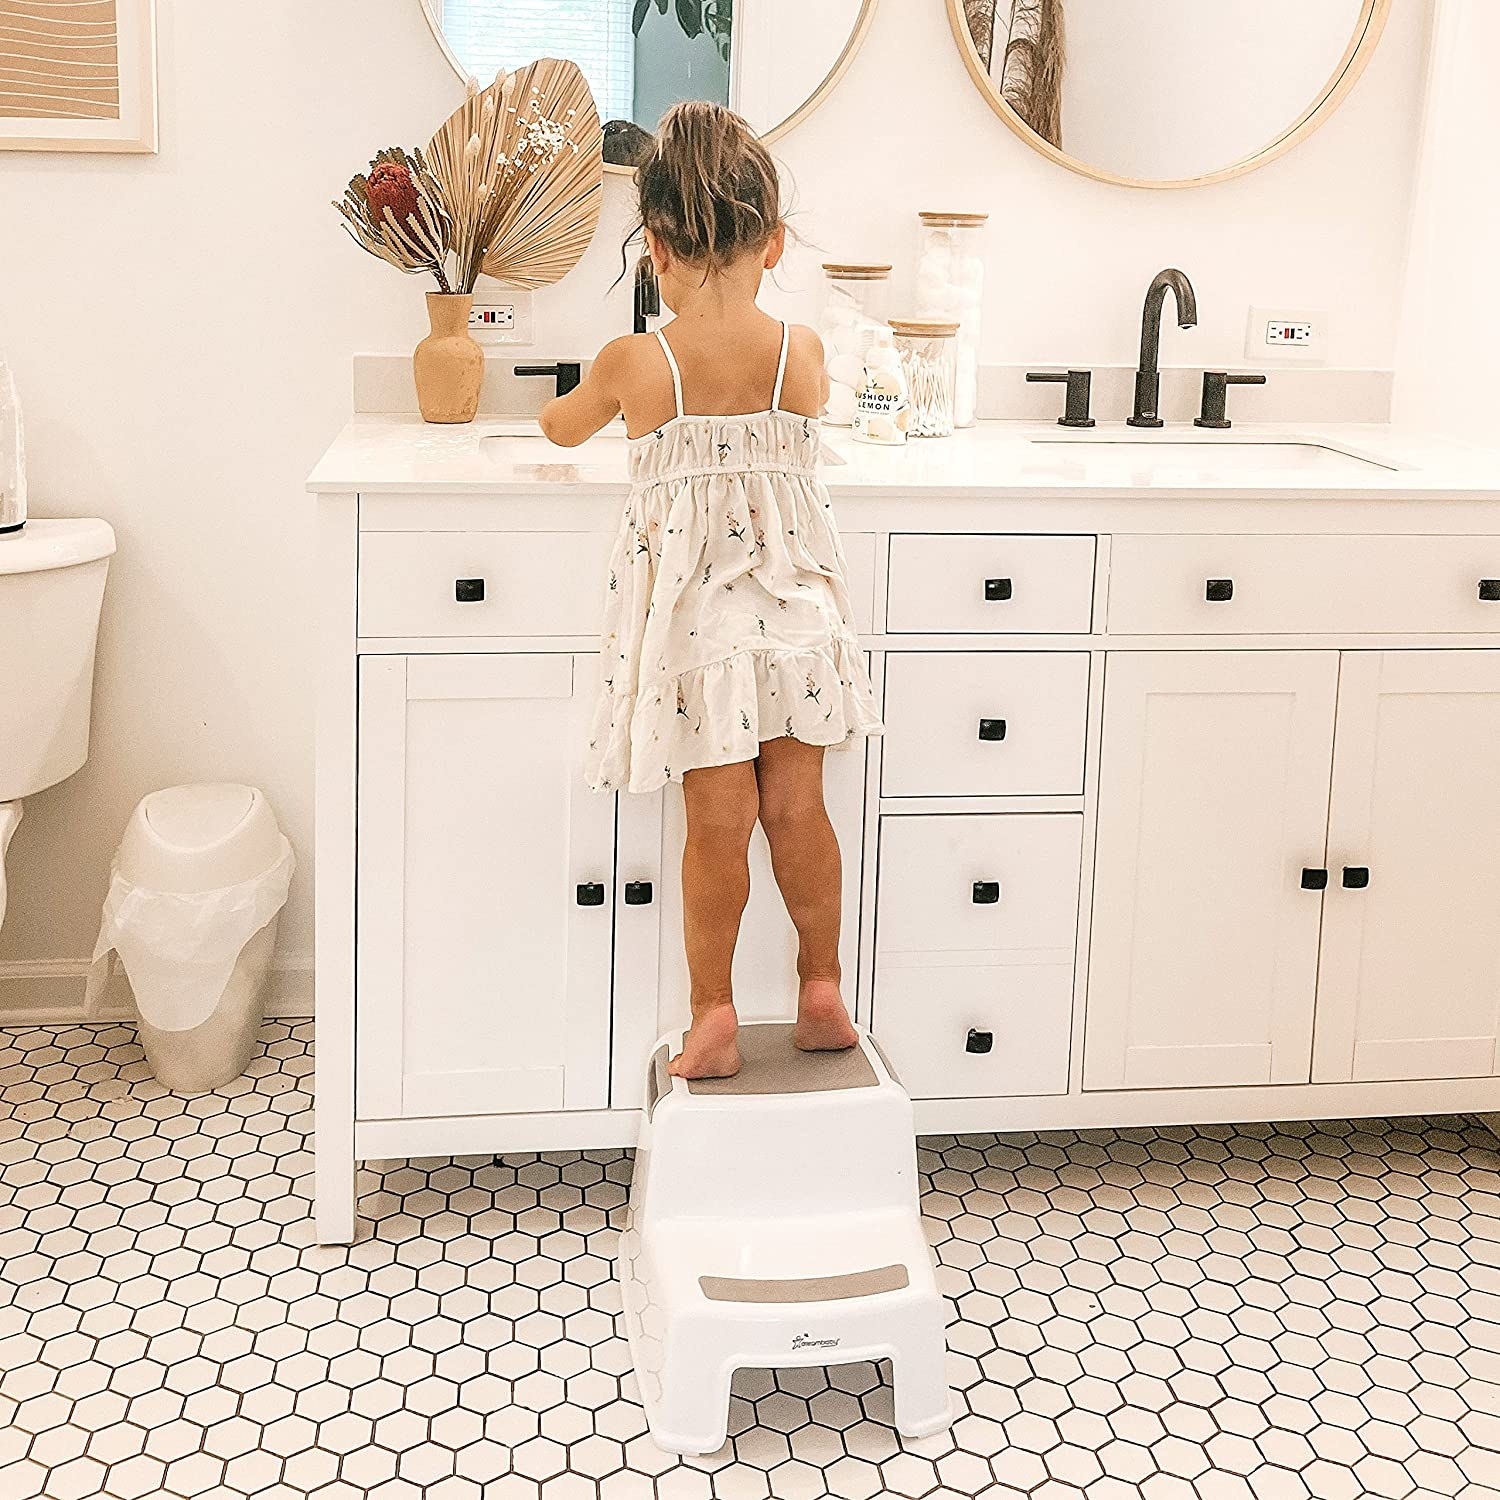 A kid standing on the step stool and washing their hands